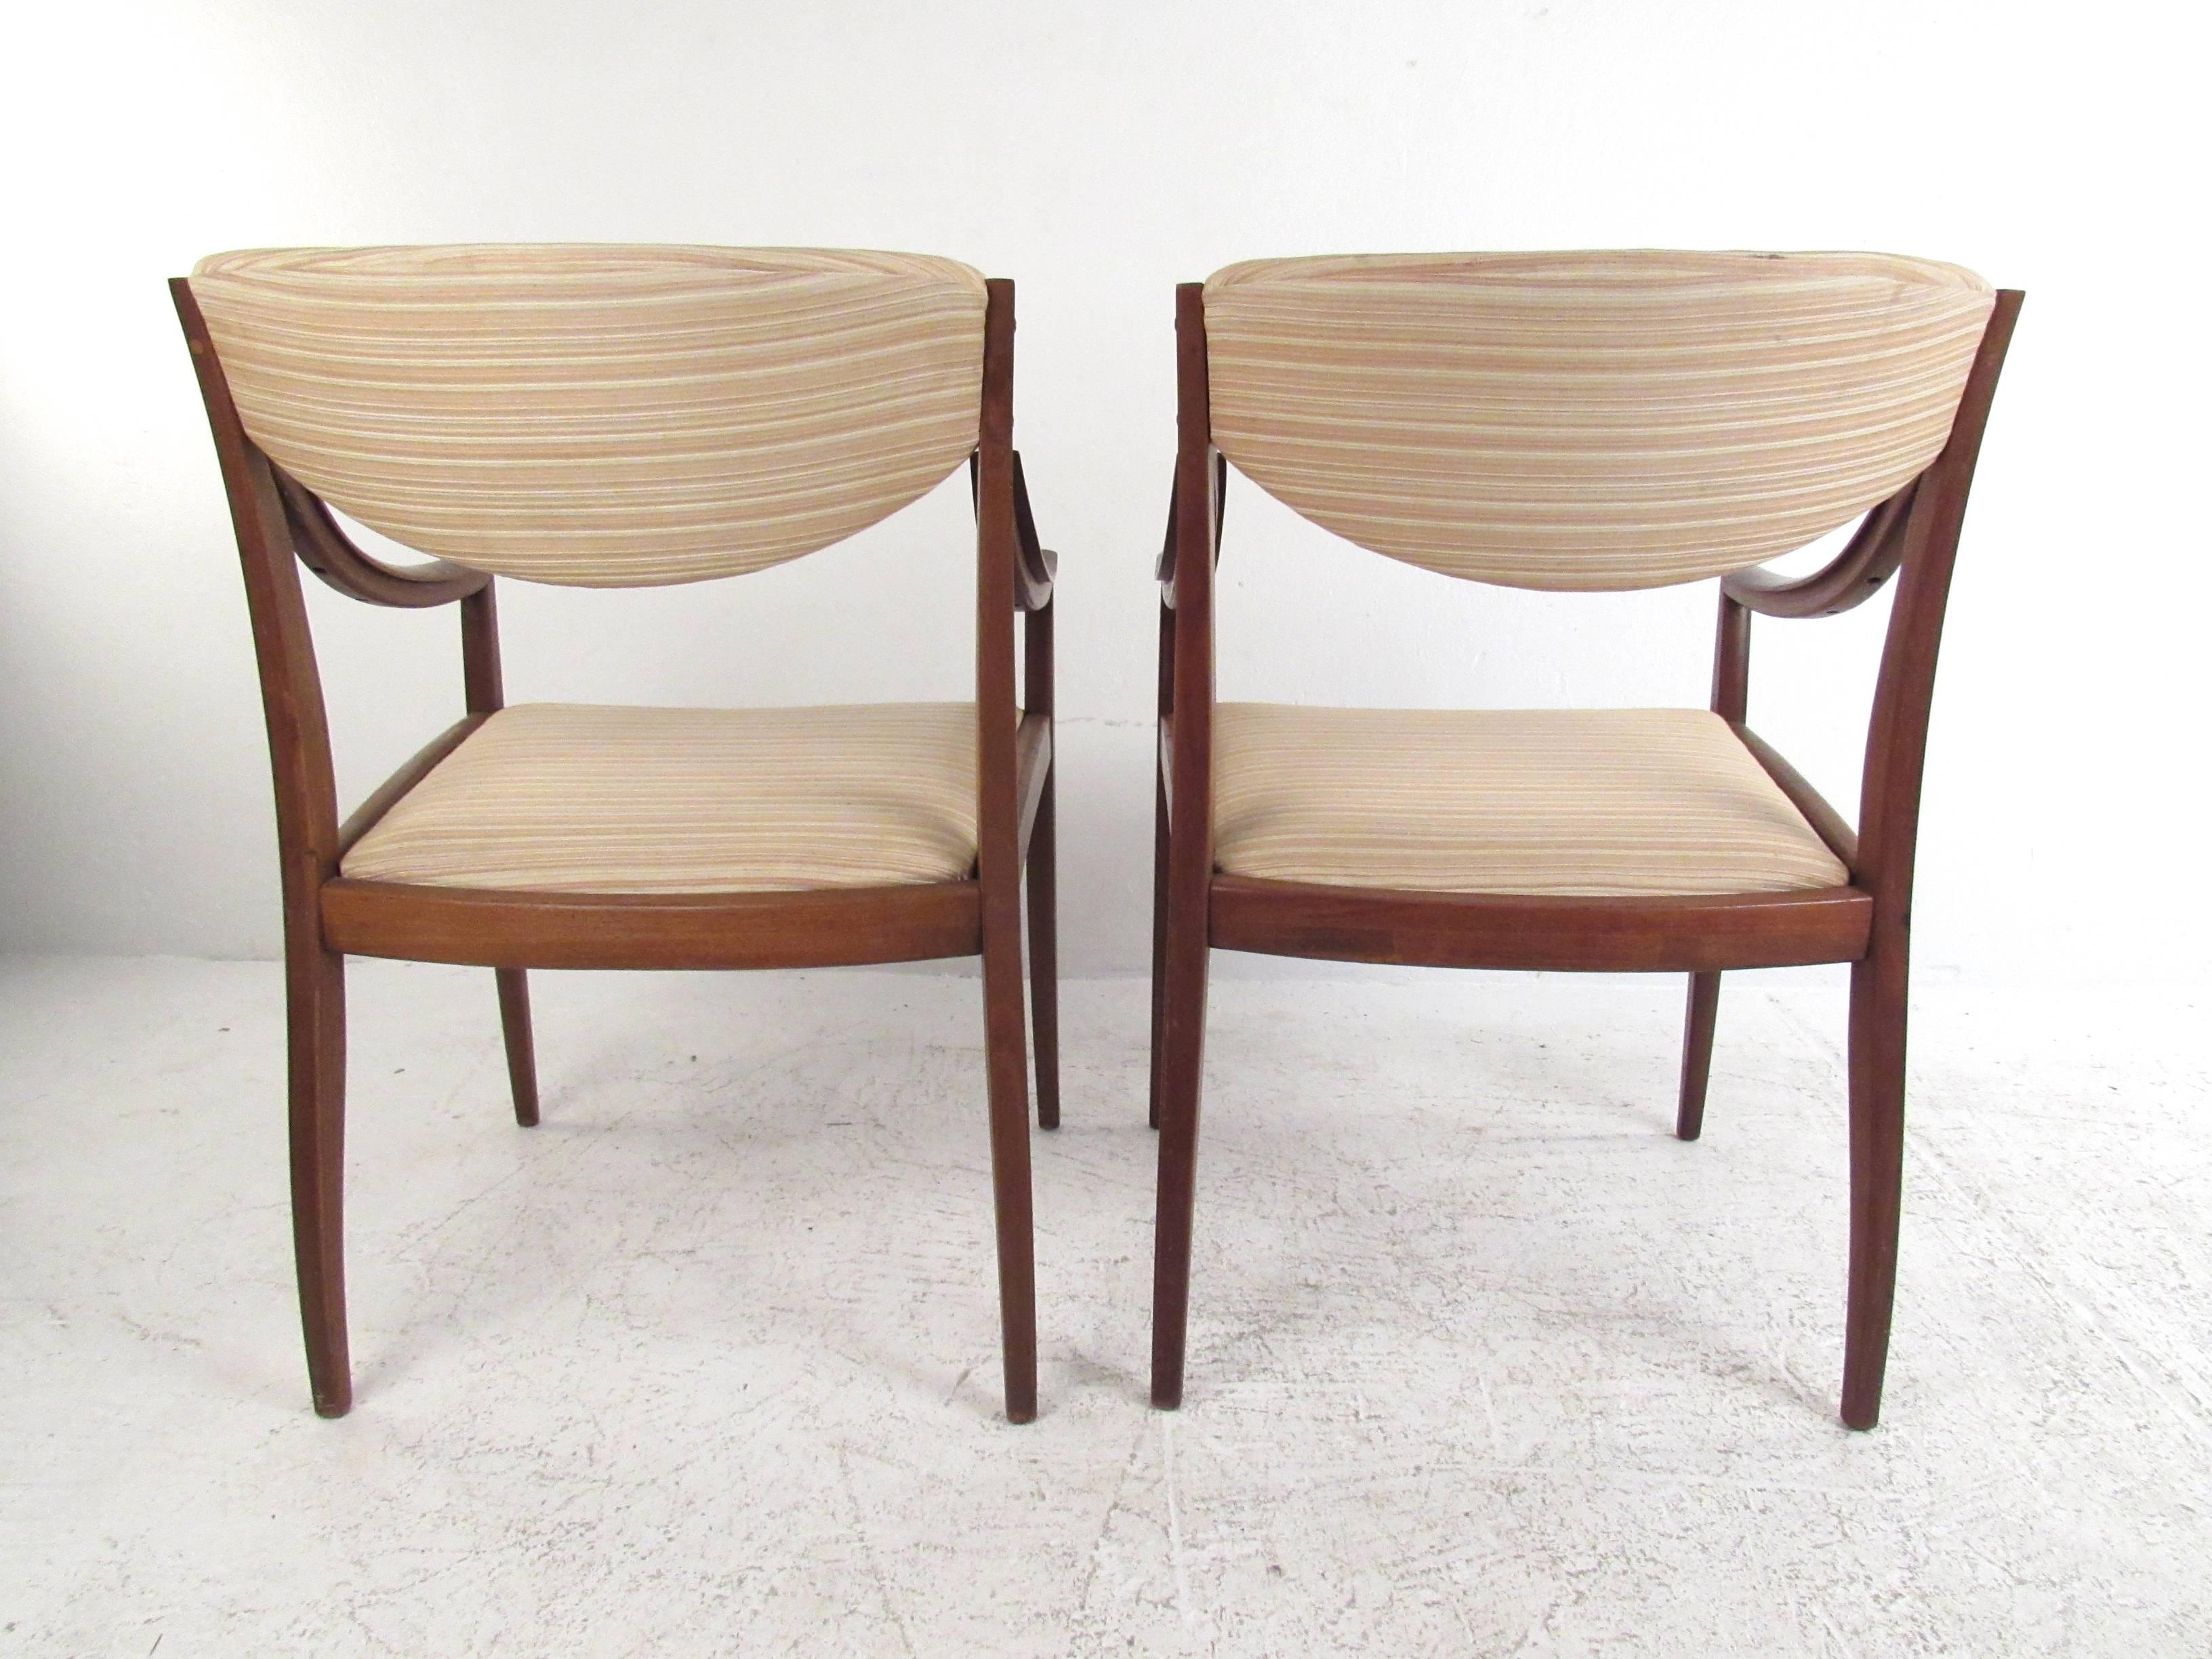 Fabric Mid-Century American Walnut Dining Chairs by Drexel